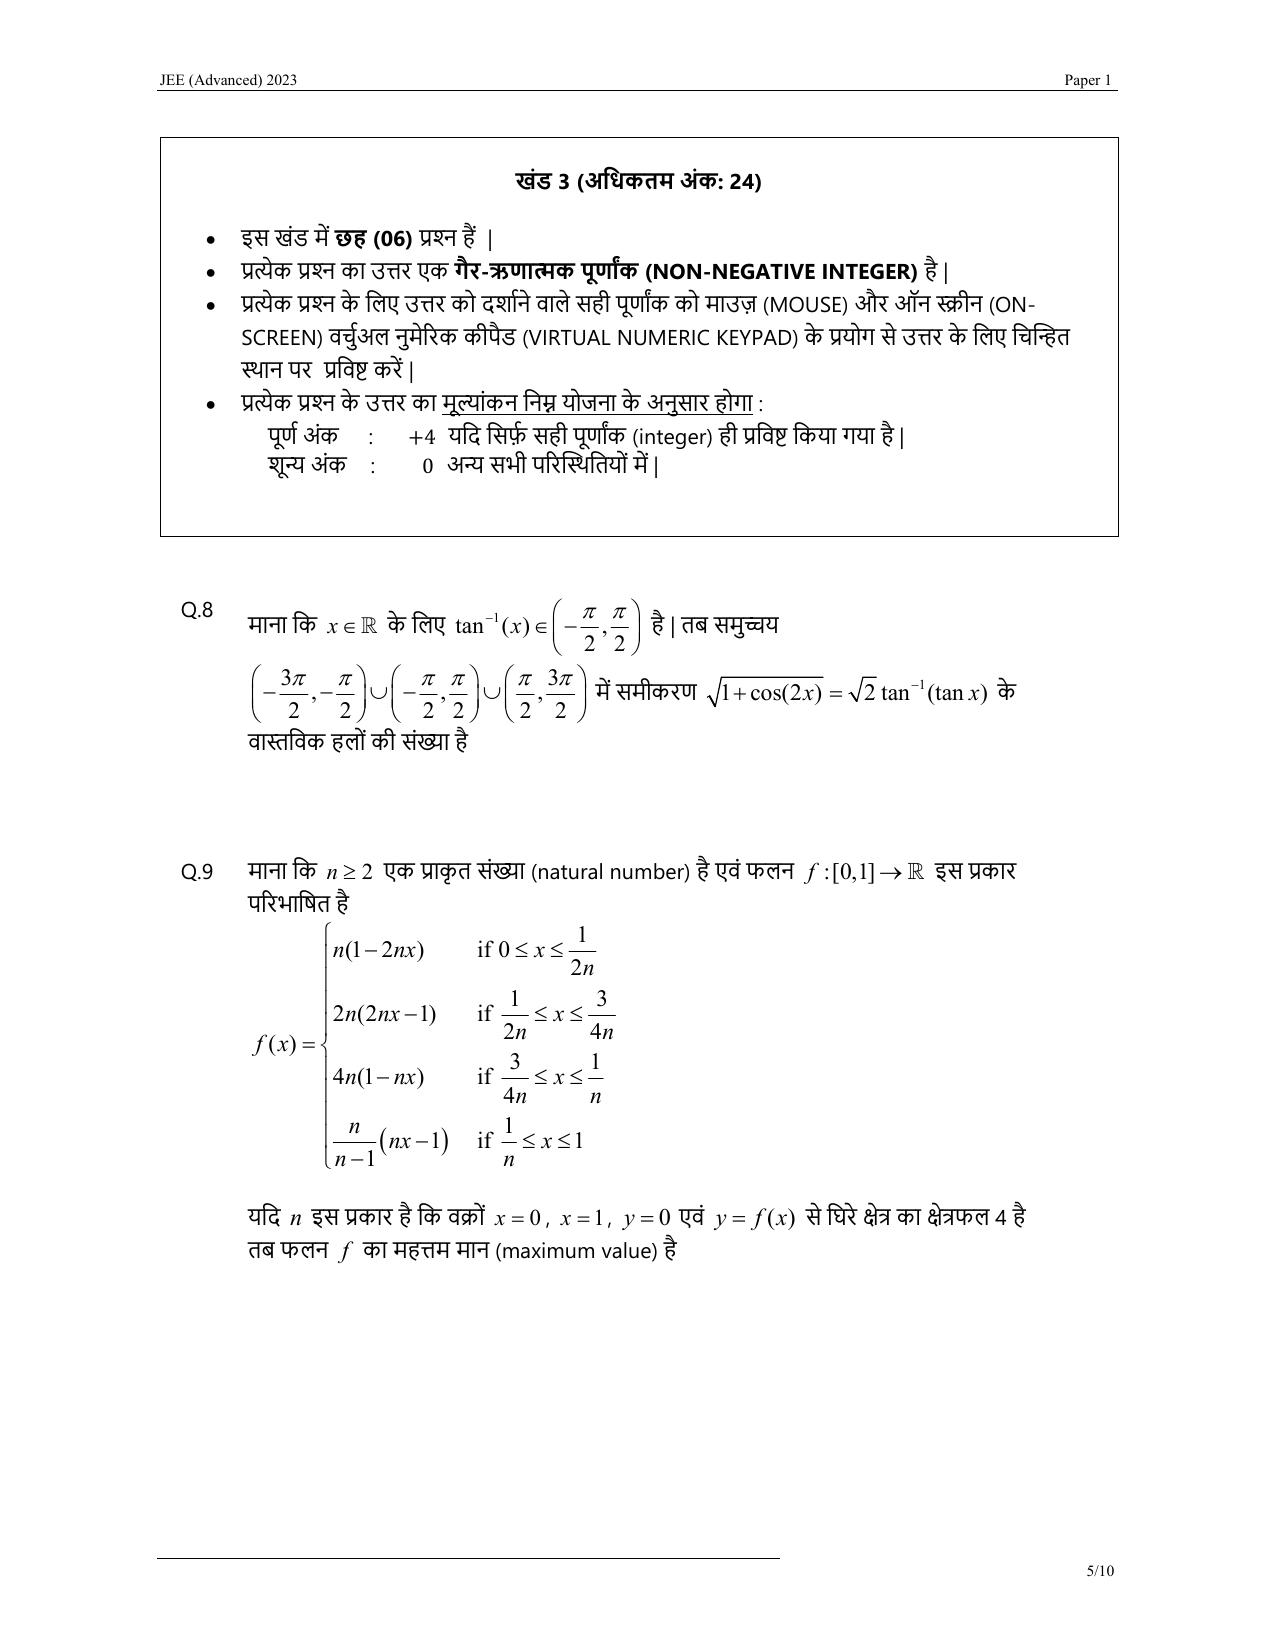 JEE Advanced 2023 Question Paper 1 (Hindi) - Page 5